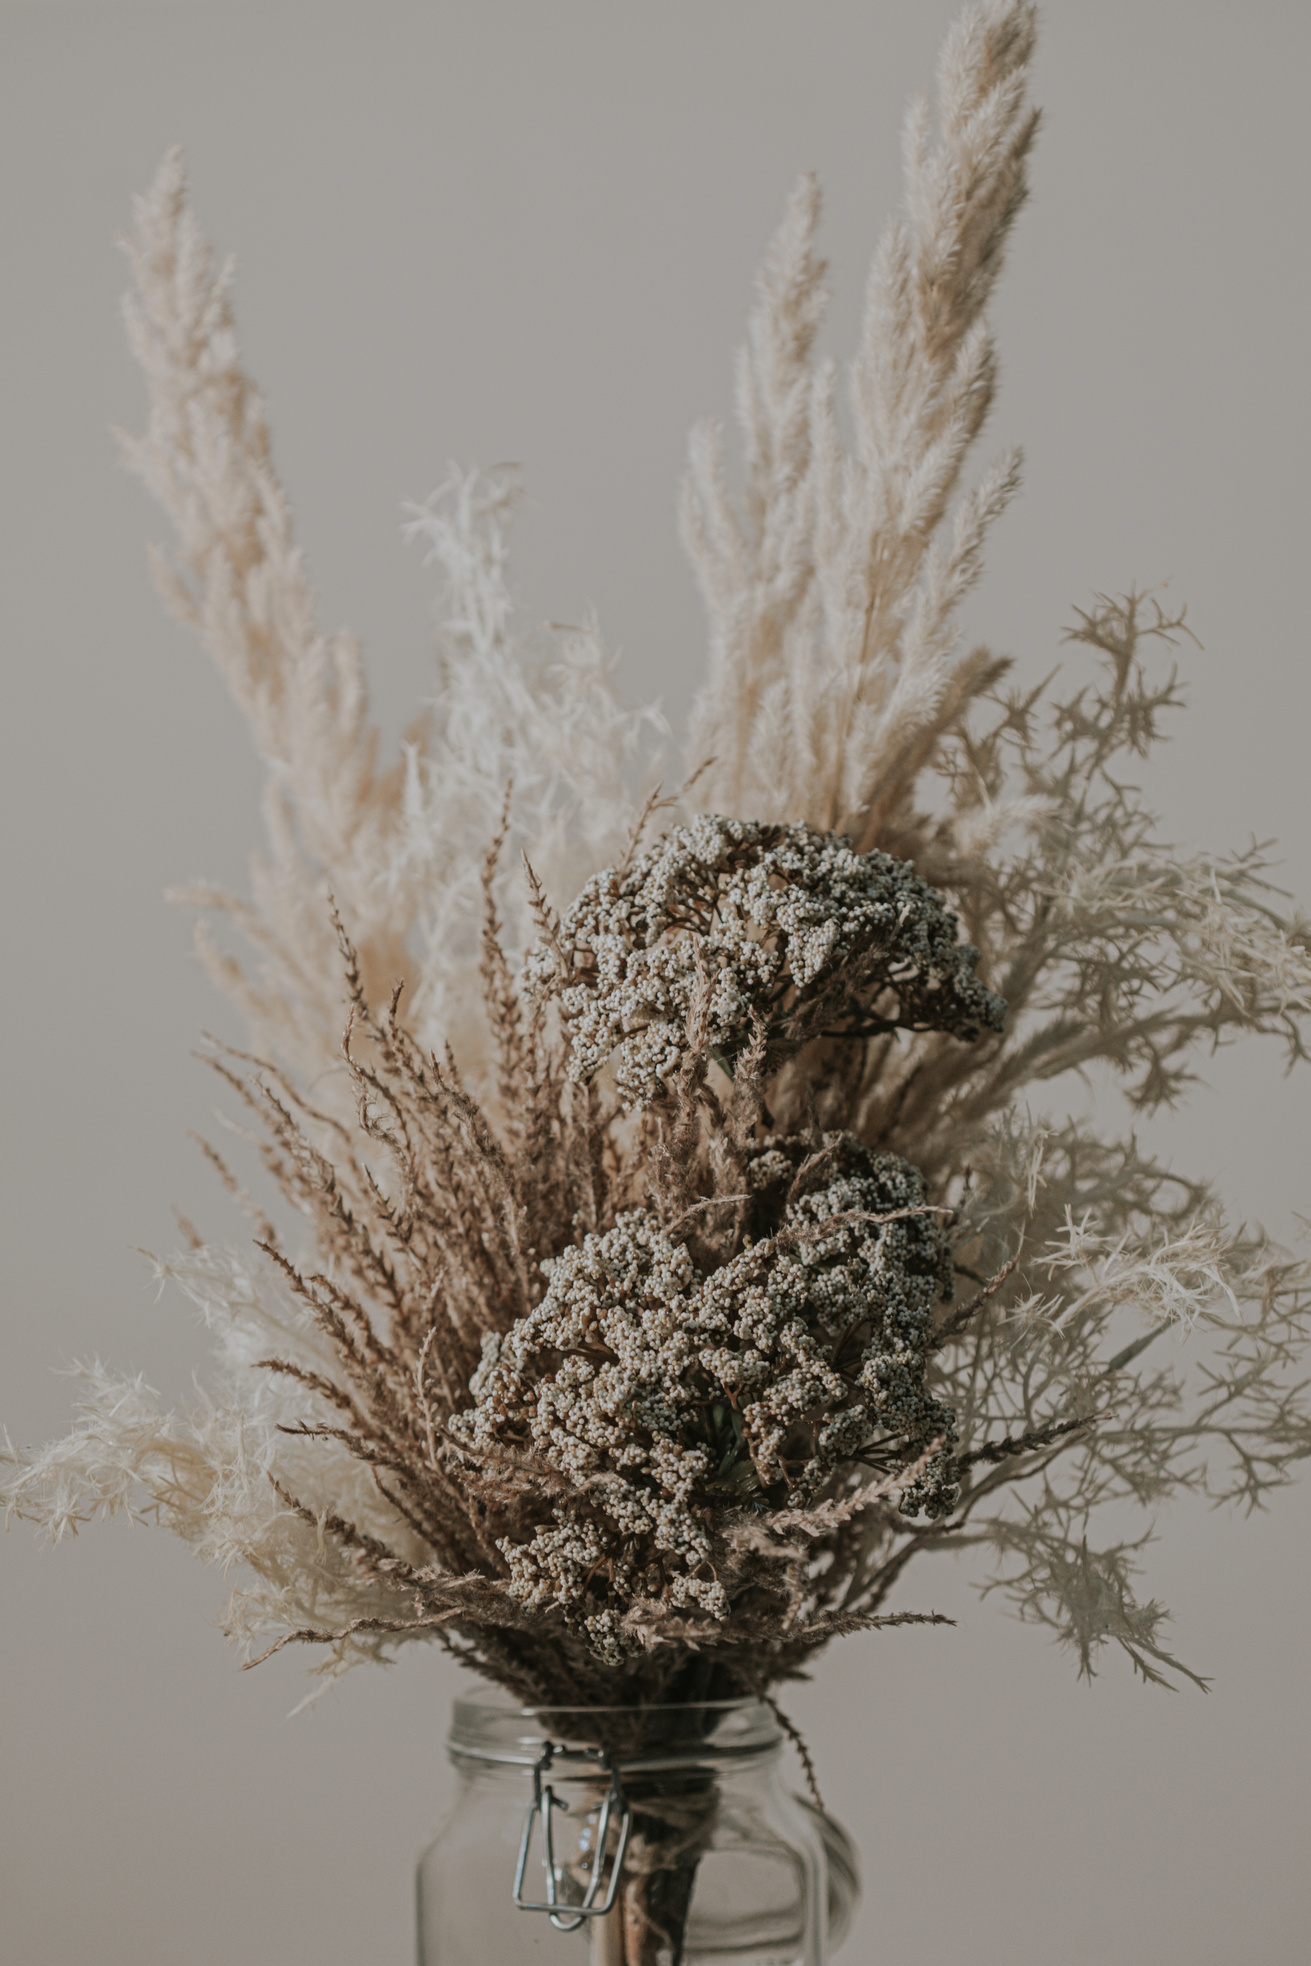 Bouquet of Dried Flowers on Light Background